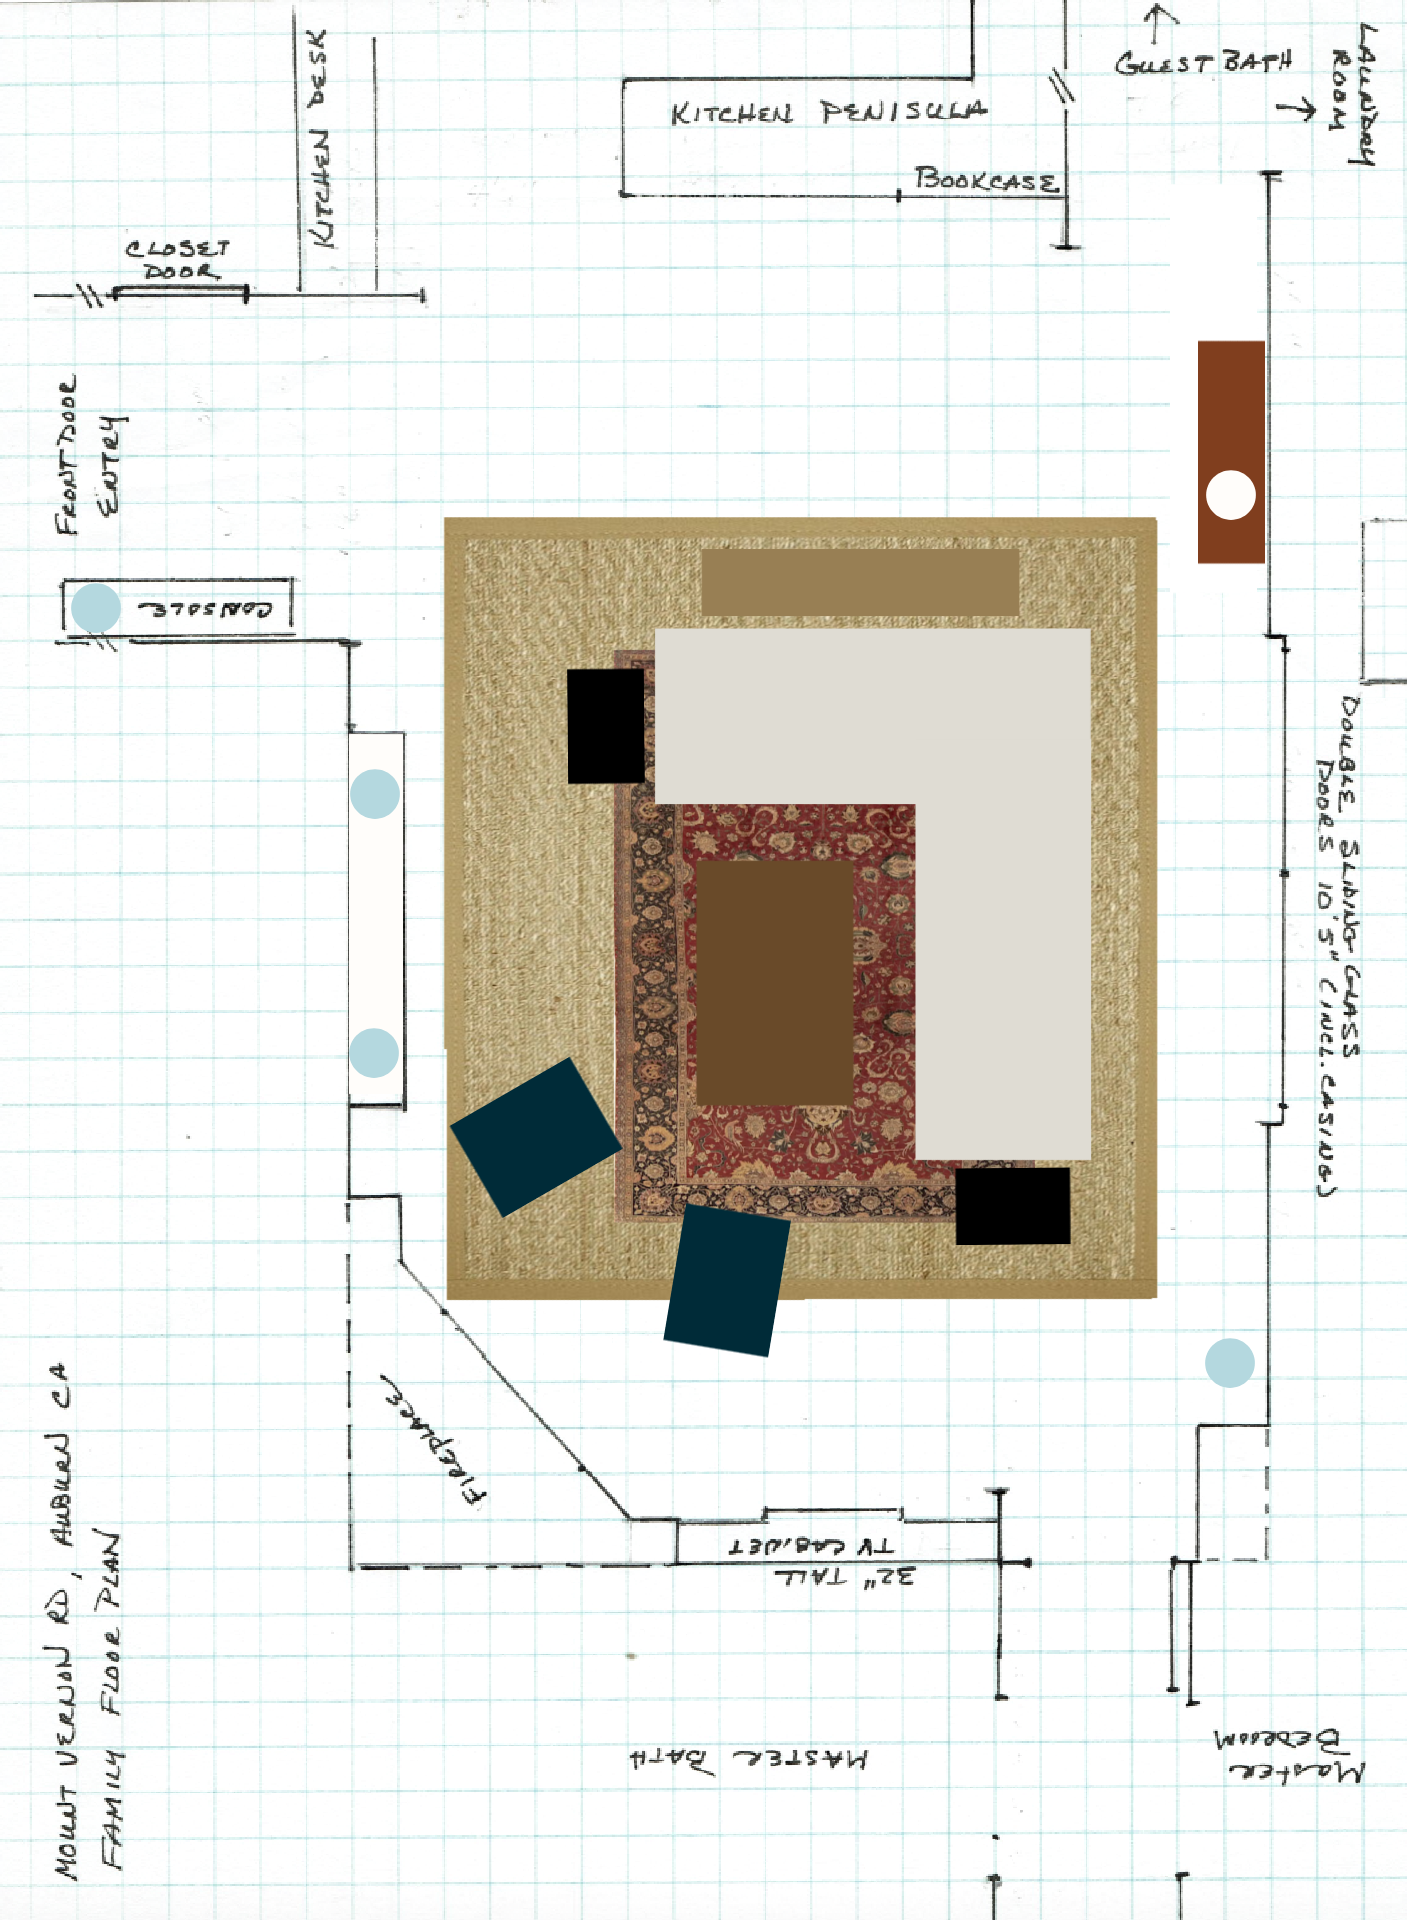 Mary's floorplan revised with seagrass rug, slipper chairs, opium coffee table, end tables